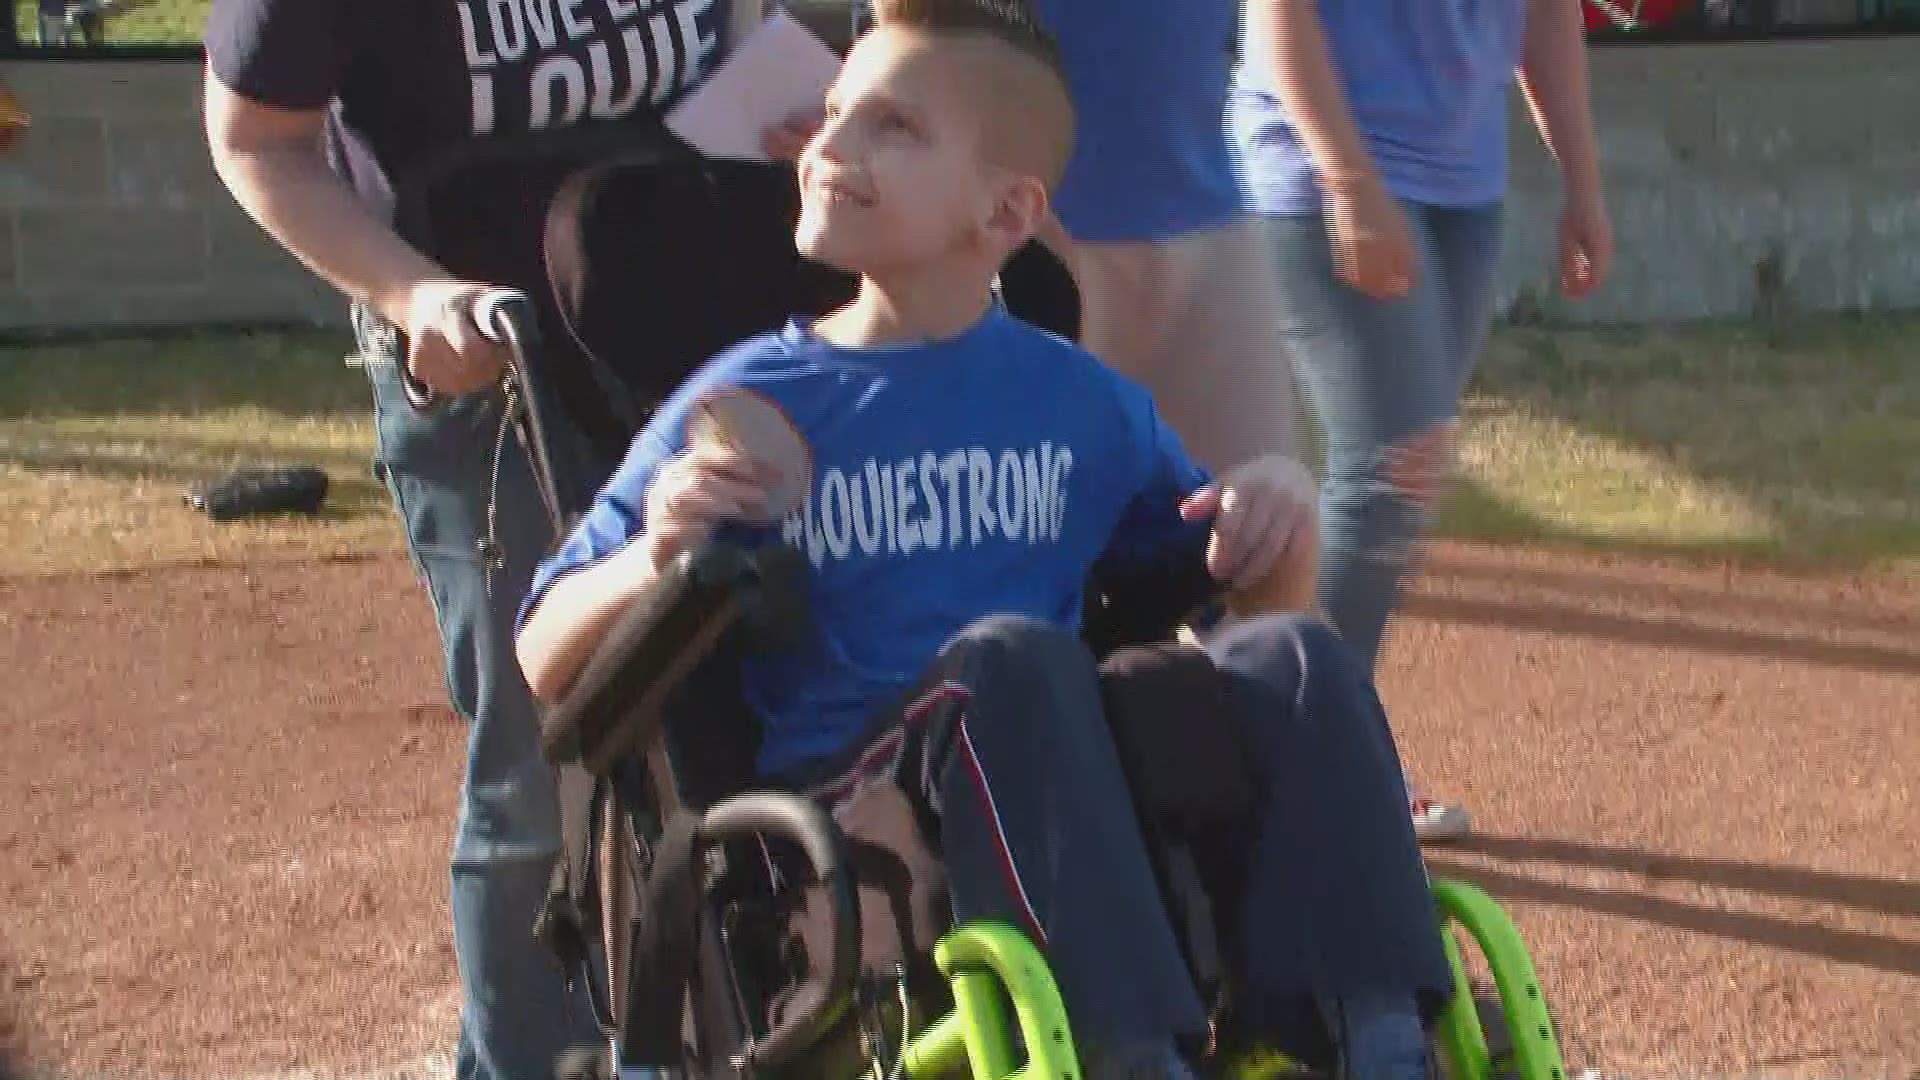 Despite all the odds stacked against him, Louie is still inspiring others across the world, including a baseball team in Bryant who have re-named their team "Louie Strong."